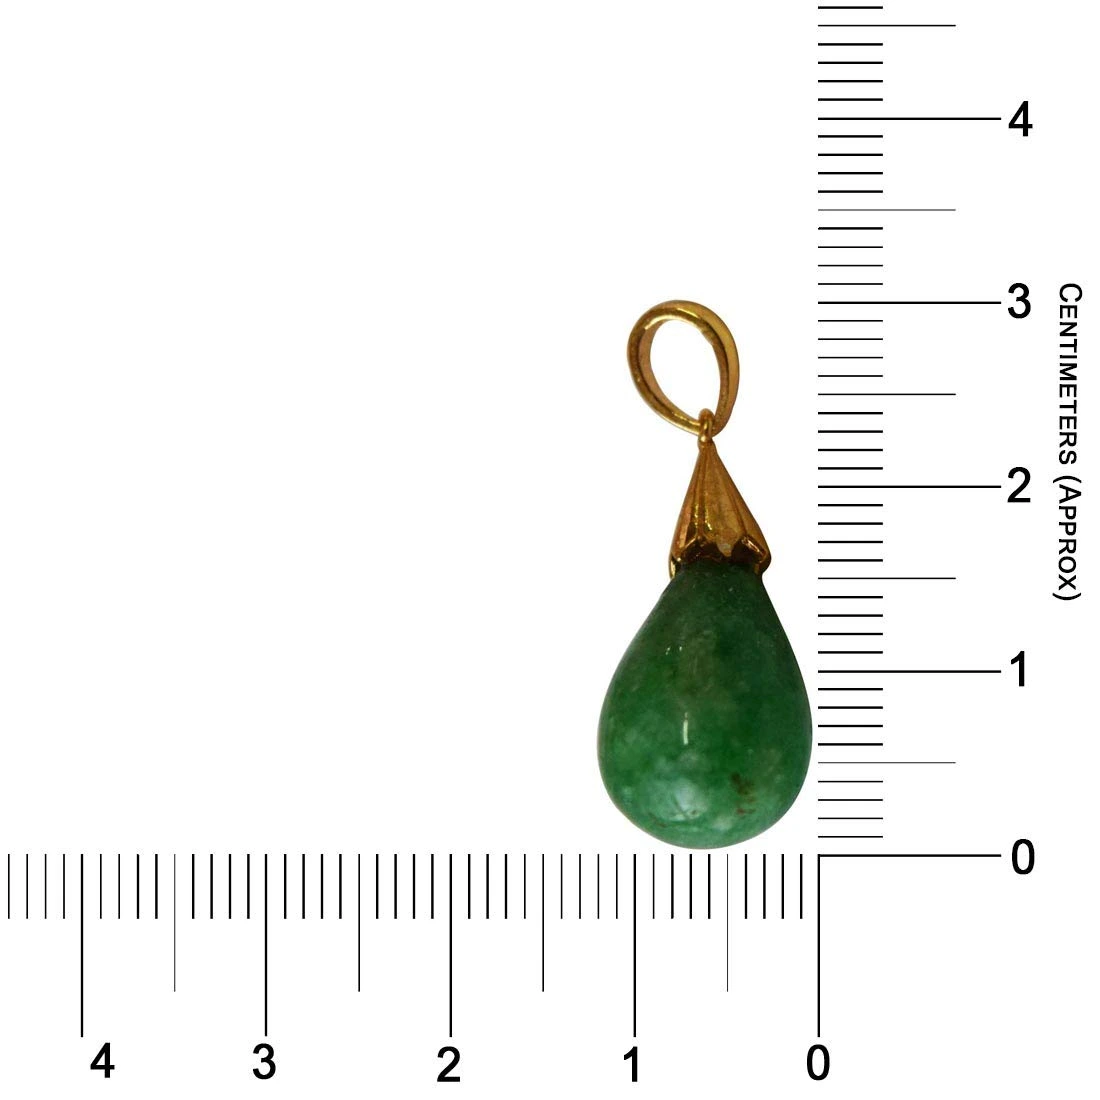 13.68 cts Real Drop Green Onyx Sterling Silver Pendant with Gold Finished Chain for Women (SDS319-13.68cts)